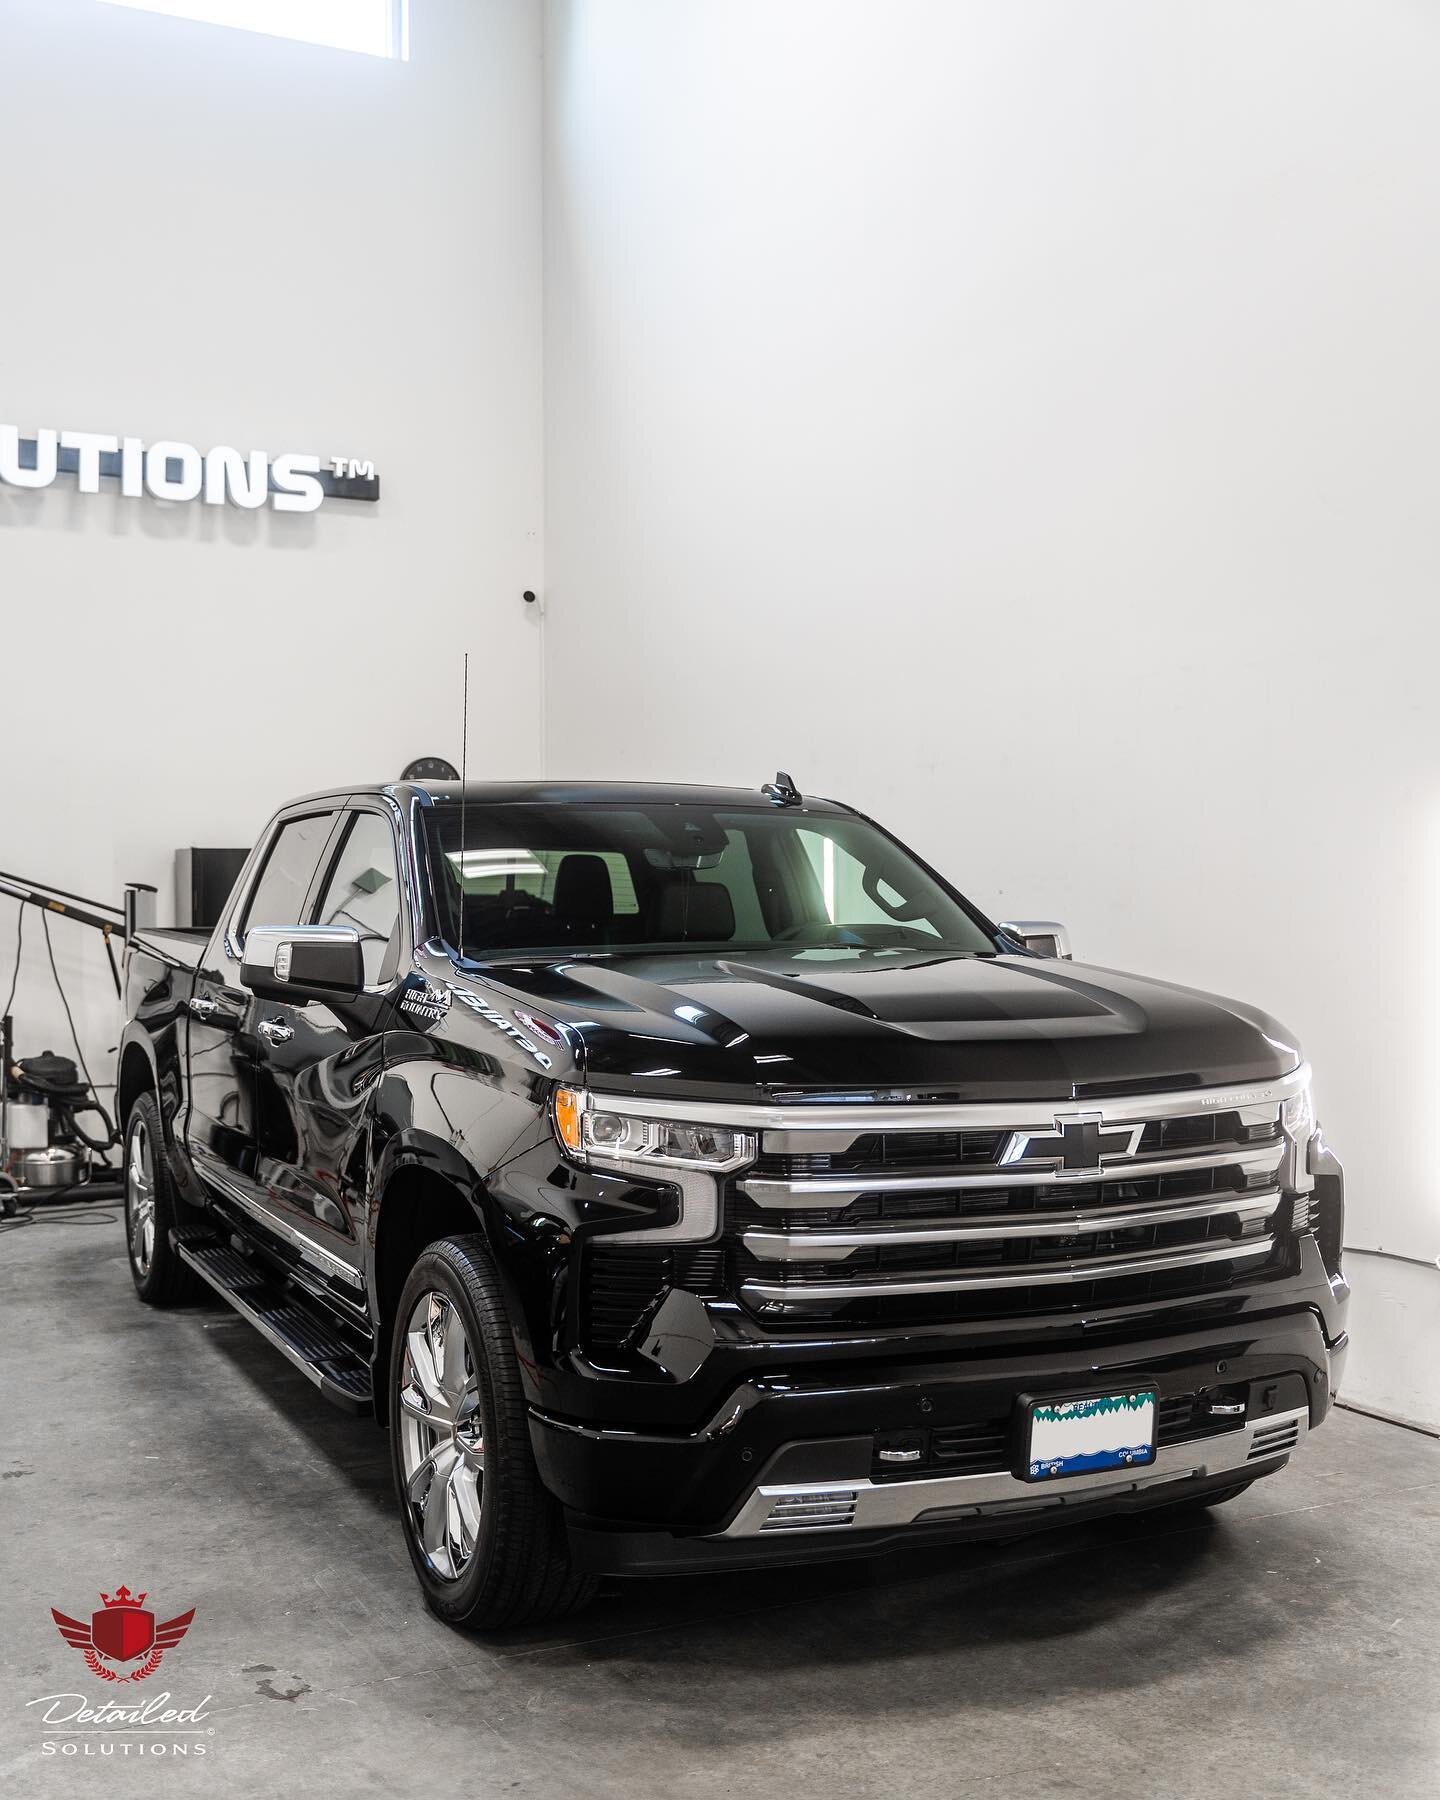 💪 2023 #Chevy Silverado High Country 
➖
☑️ Film Solutions&copy; PPF
☑️ Exterior detail and decontamination 
☑️ Paint correction
☑️ Nano Solutions&copy; ceramic / graphene coating
➖
📷 @heydondownton 
➖
Have Your Investment Protected Today!
➖
DM For 